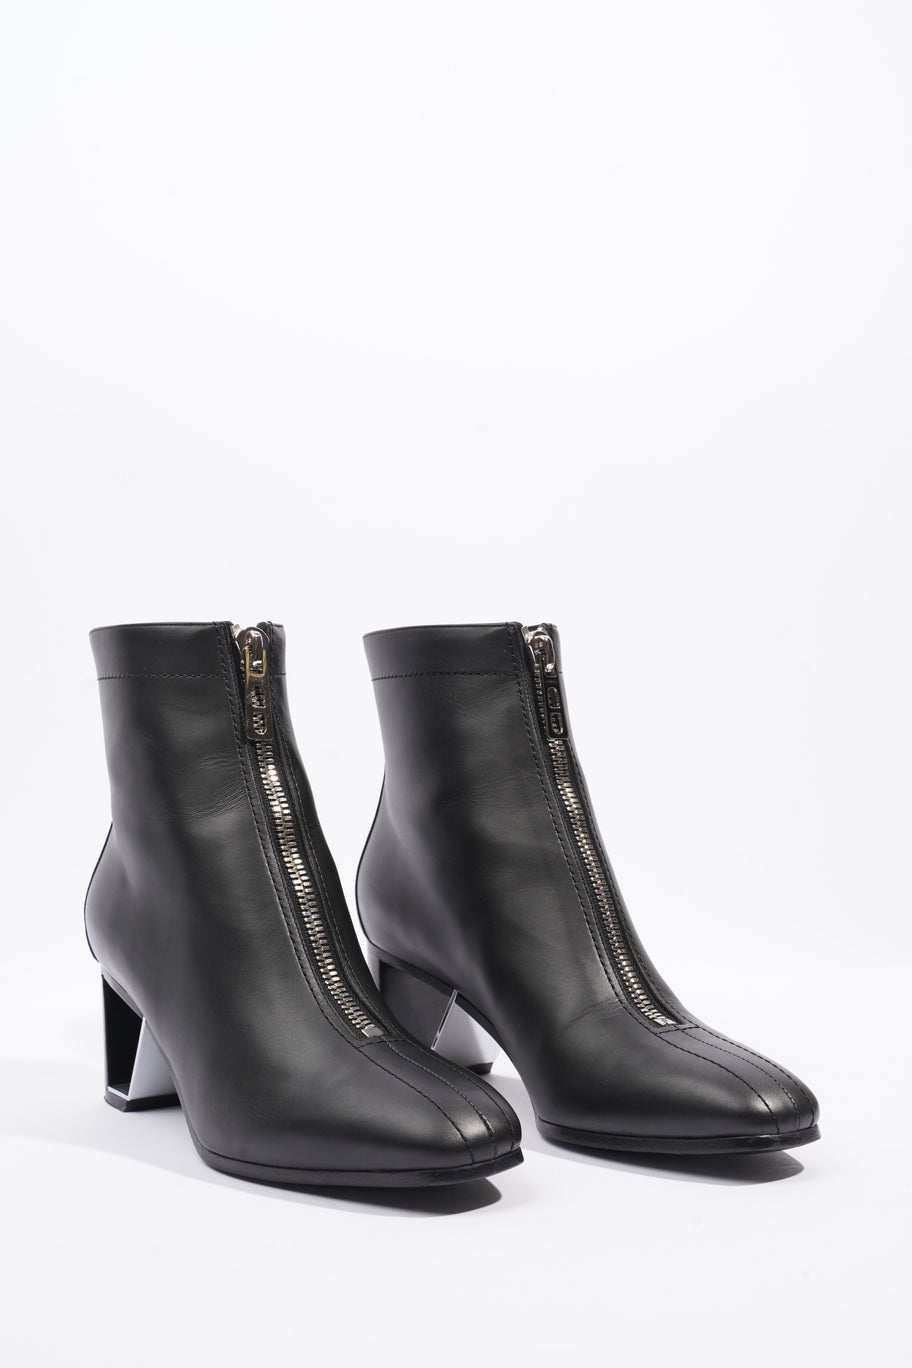 Becky Zipped Ankle Boots 60mm Black / Silver Leather EU 38.5 UK 5.5 Image 2